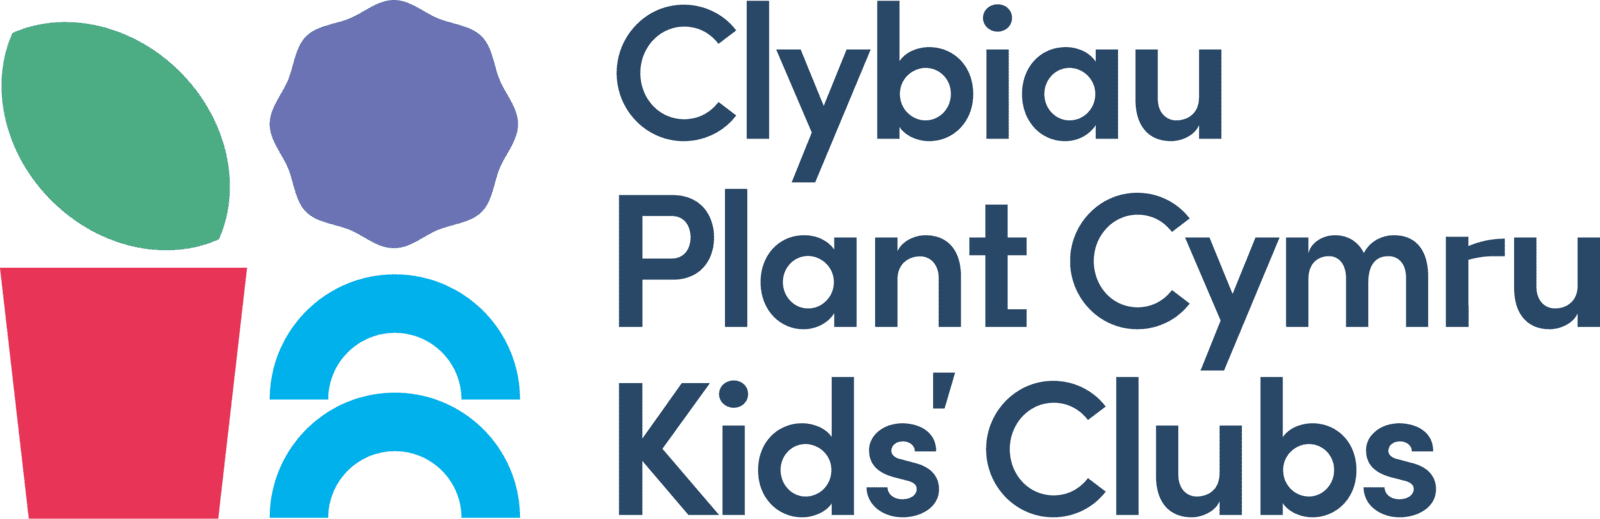 Clybiau Plant Cymru - We pave the way for Out of School Childcare in Wales